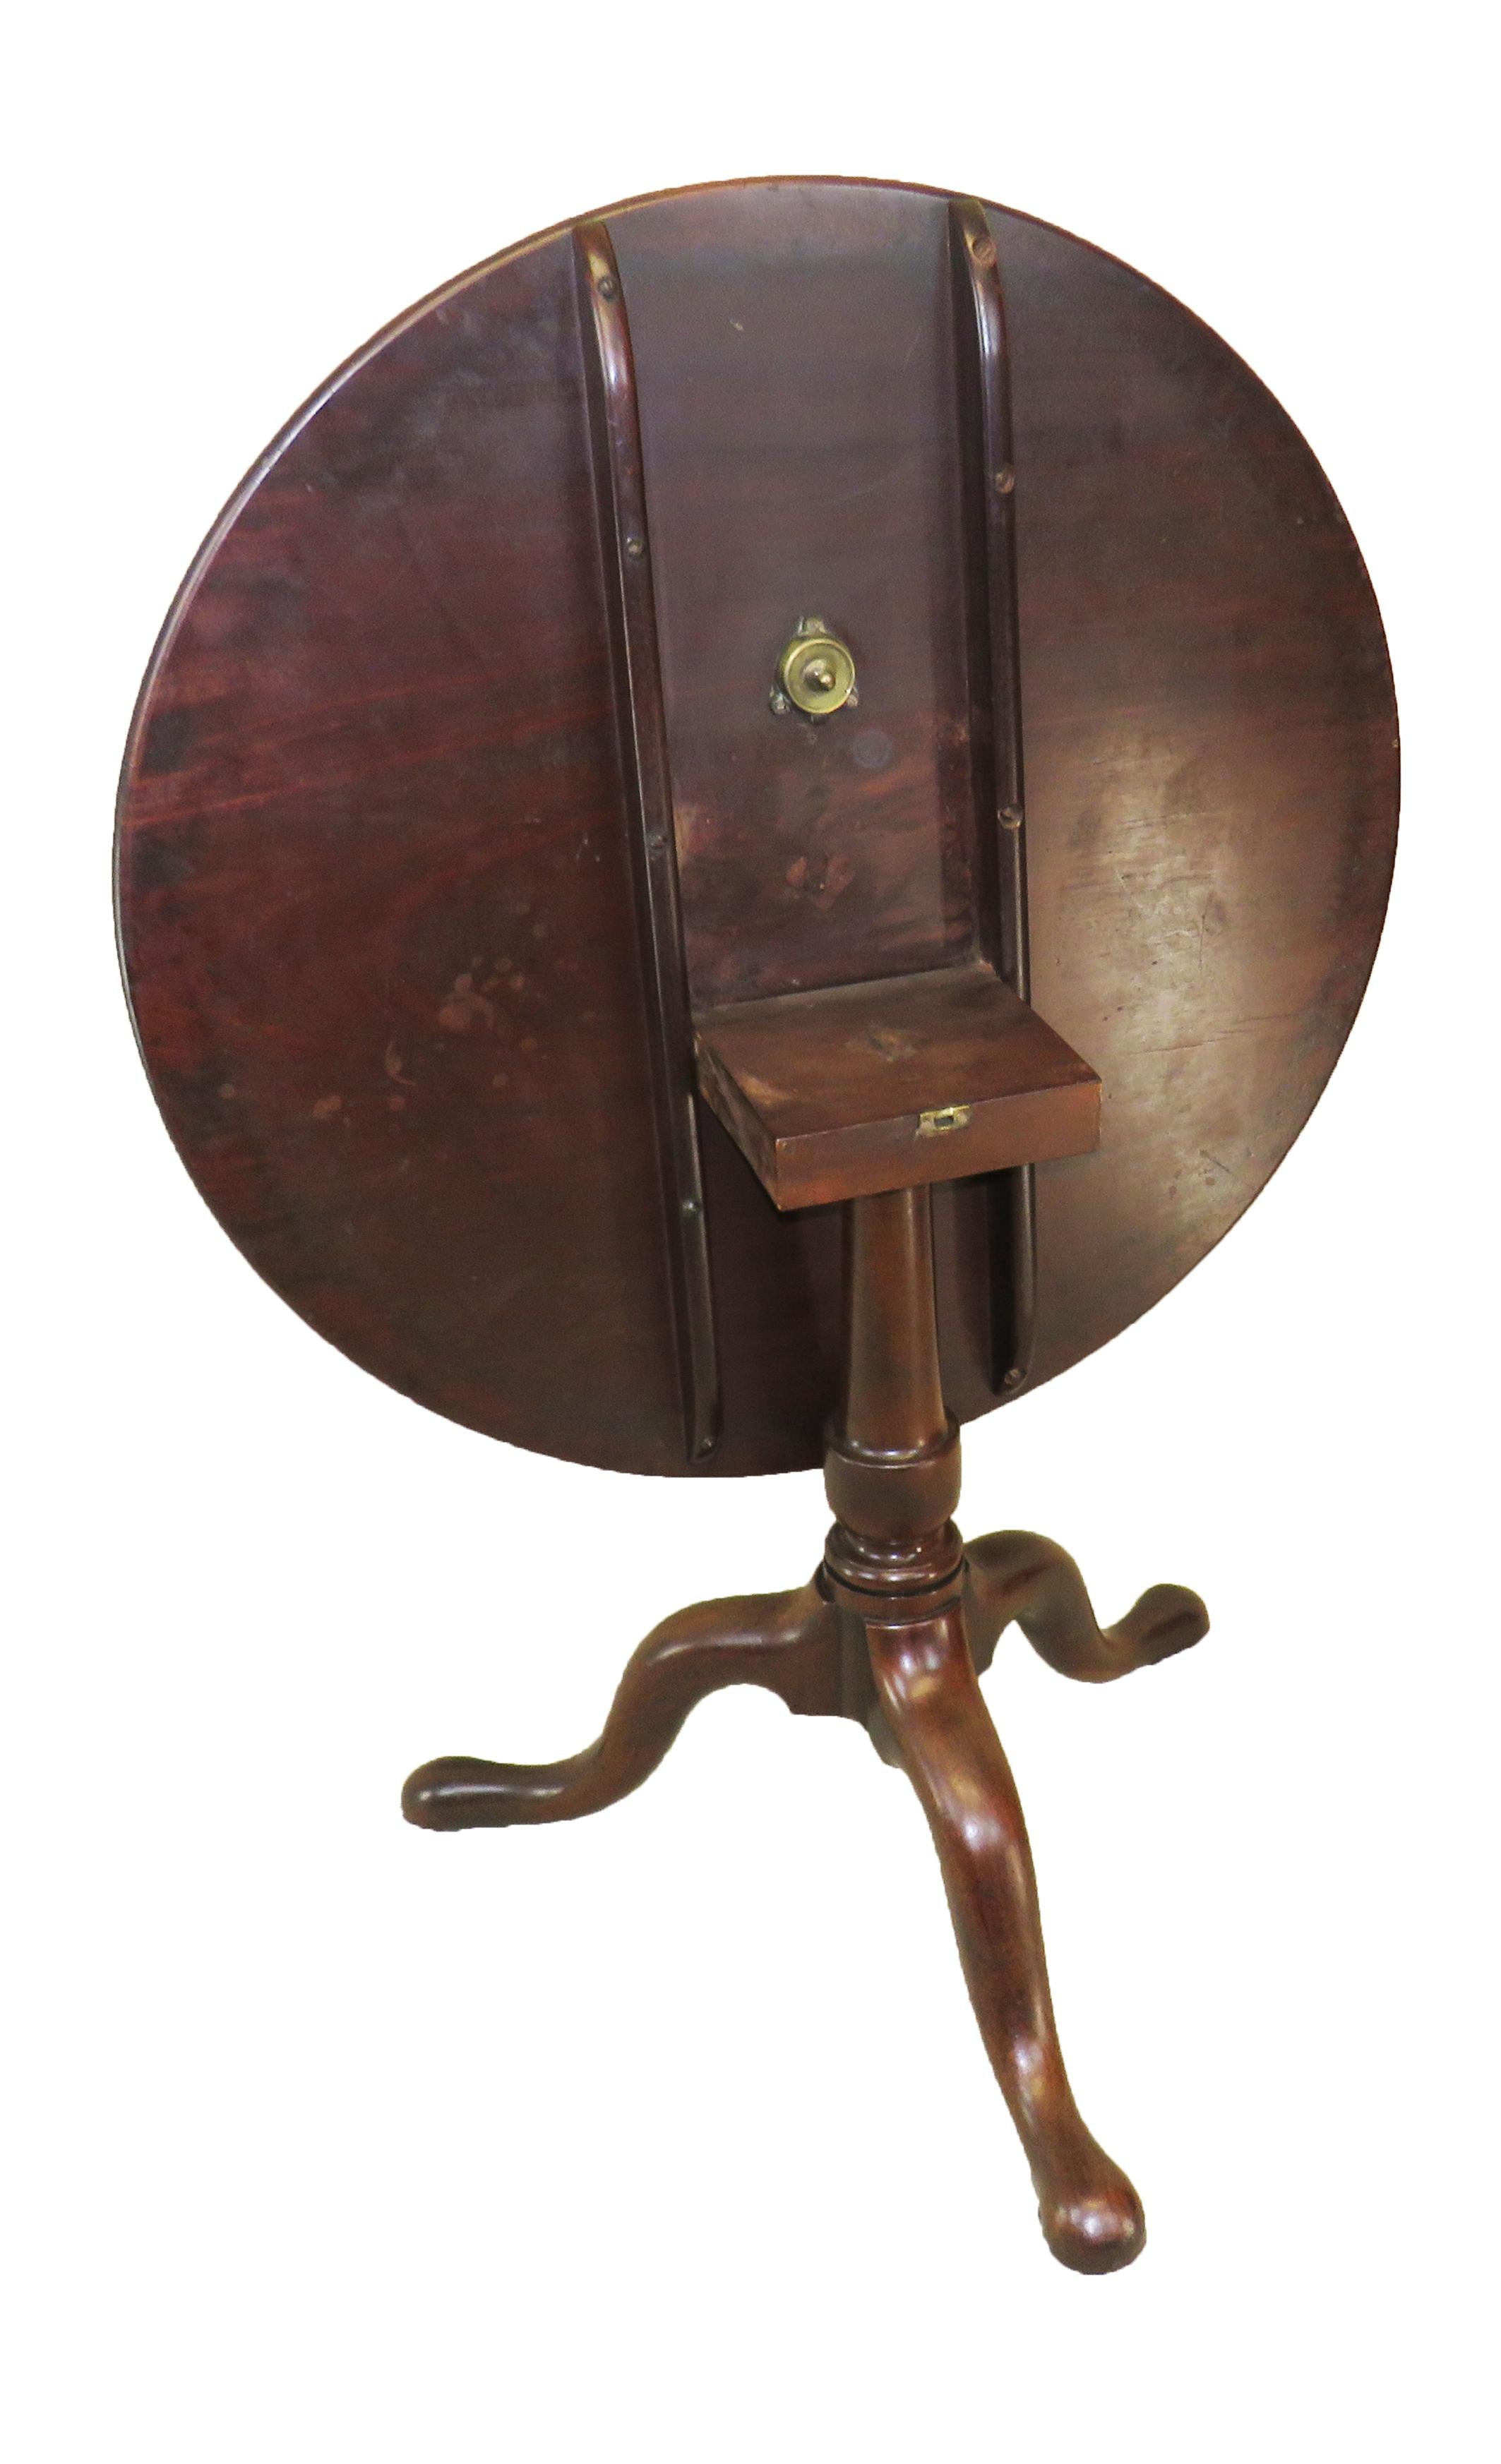 Georgian 18th Century Mahogany Tripod Table In Good Condition For Sale In Bedfordshire, GB